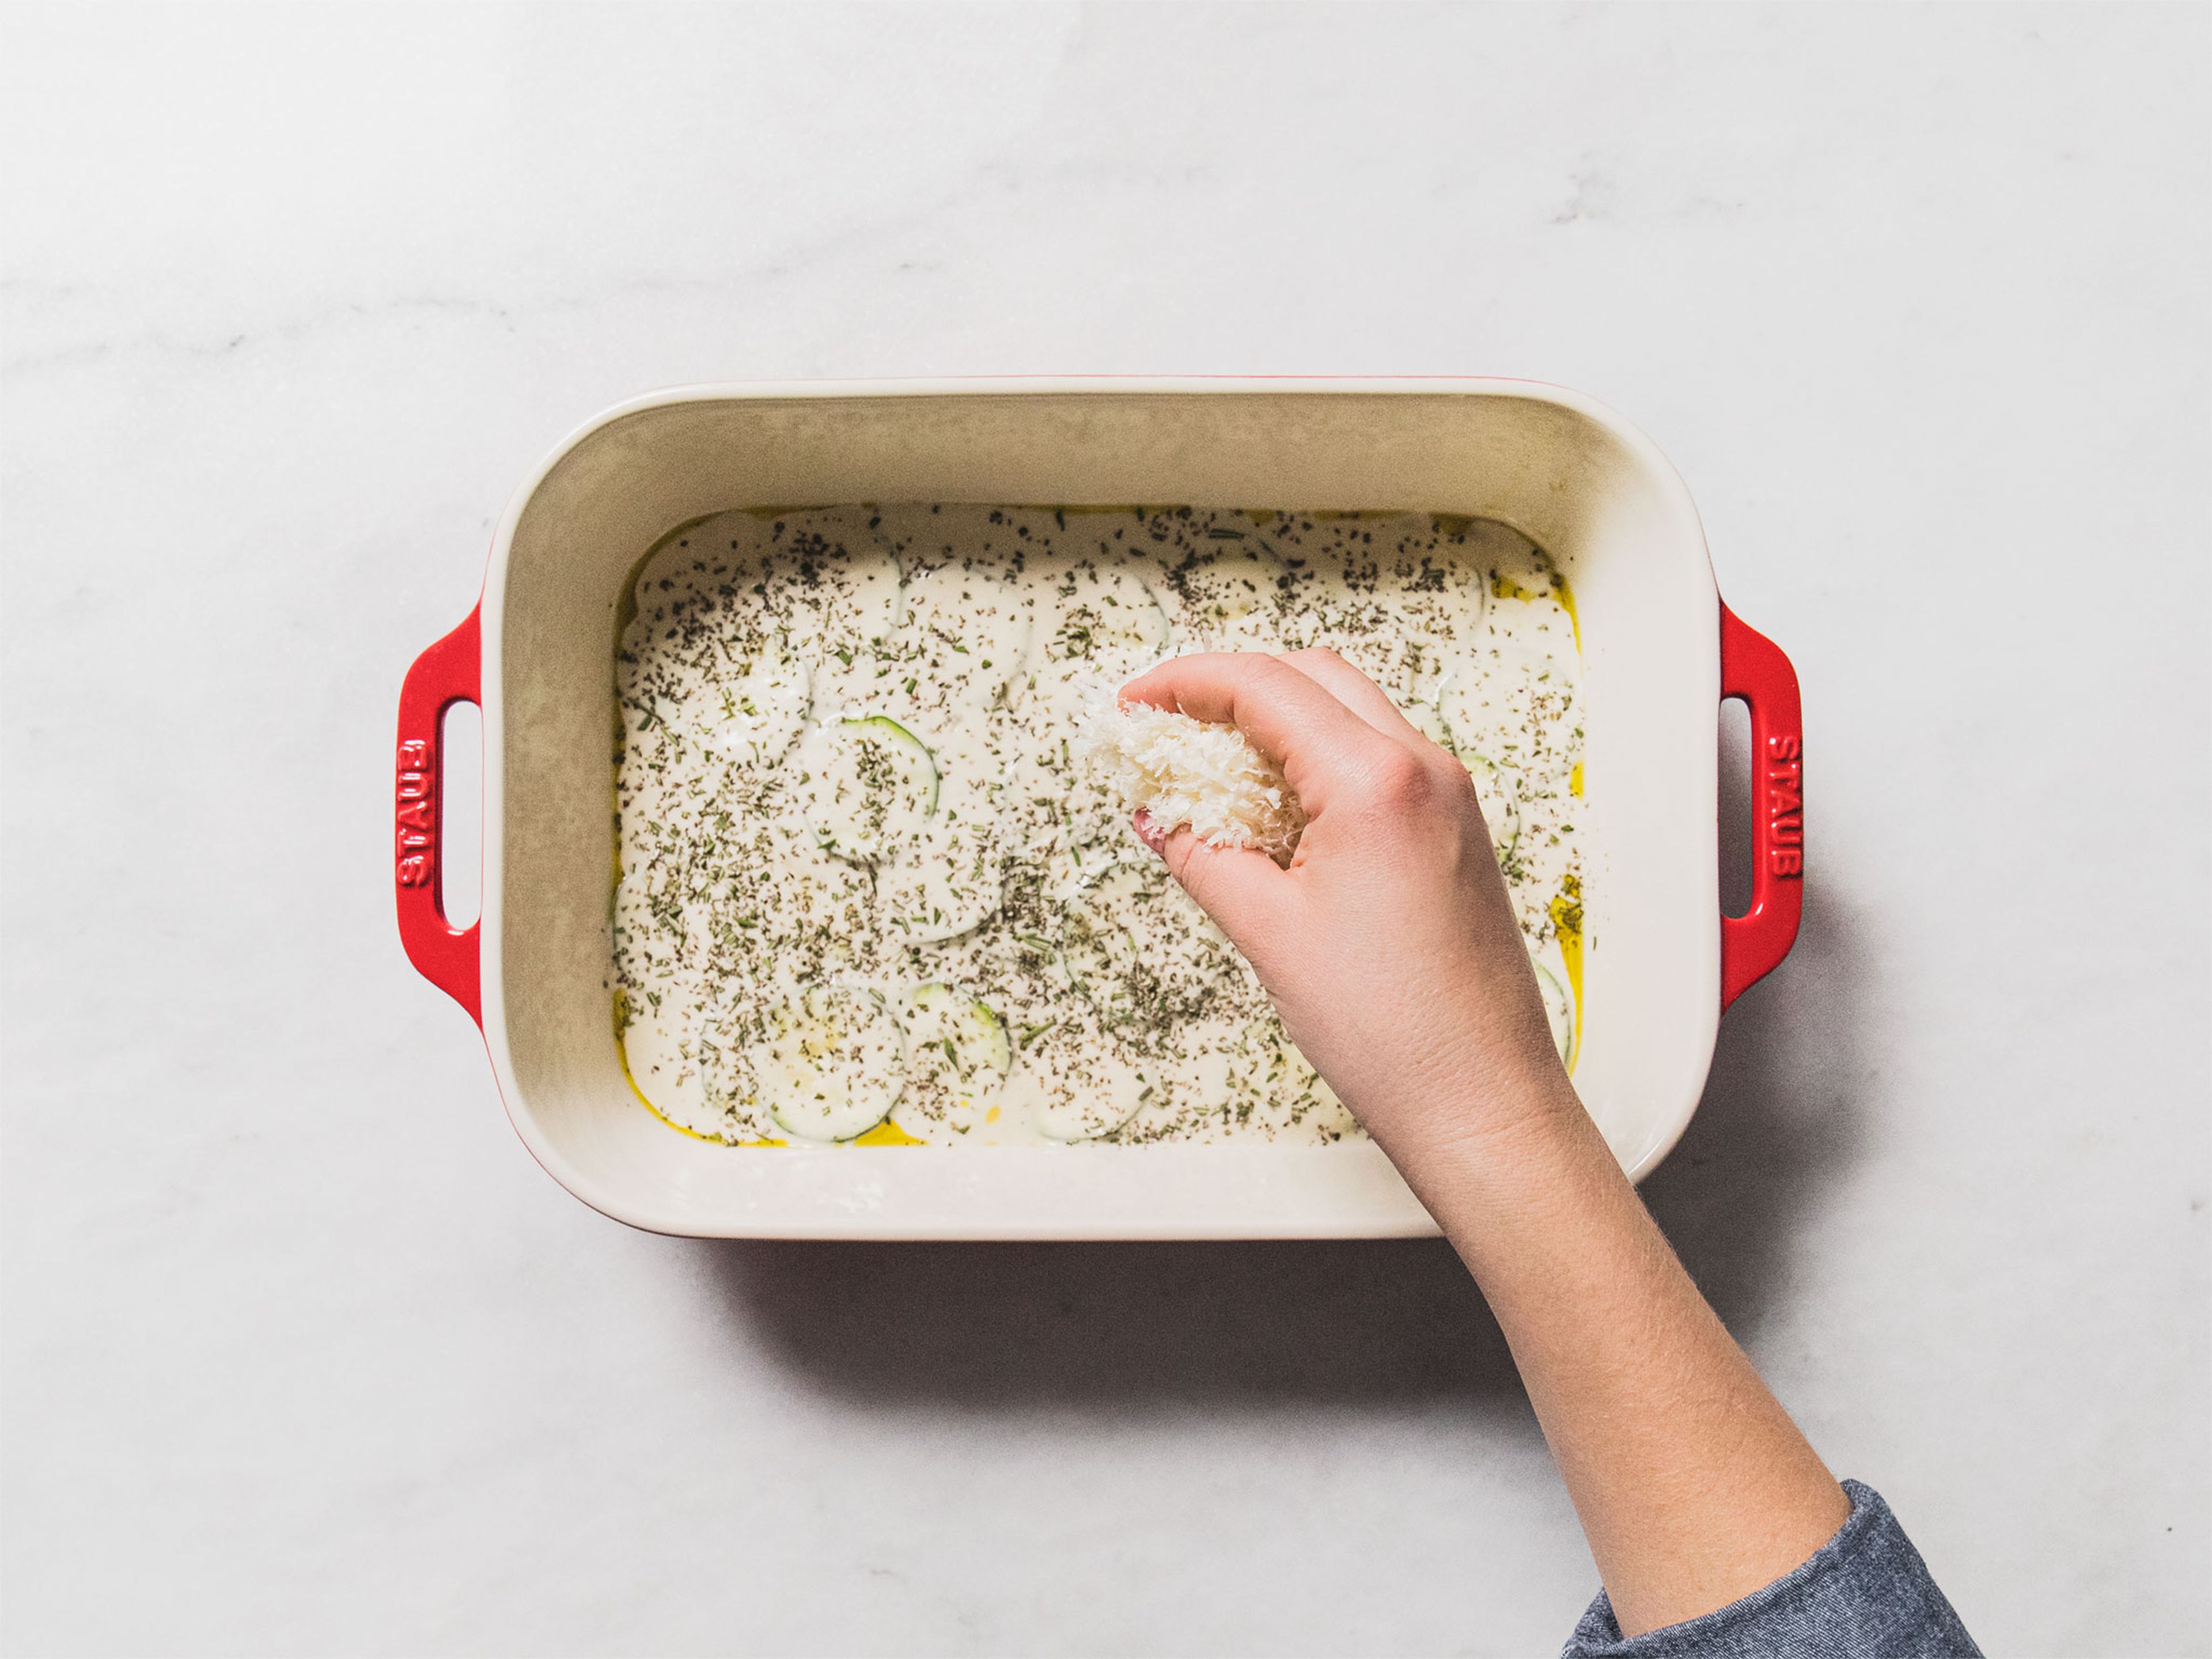 Spread the batter in a greased baking dish in as even a layer as possible. Top with chopped rosemary and Parmesan cheese. Drizzle with a little more olive oil and bake in the oven for approx. 40 min., or until golden brown. Serve immediately and enjoy!